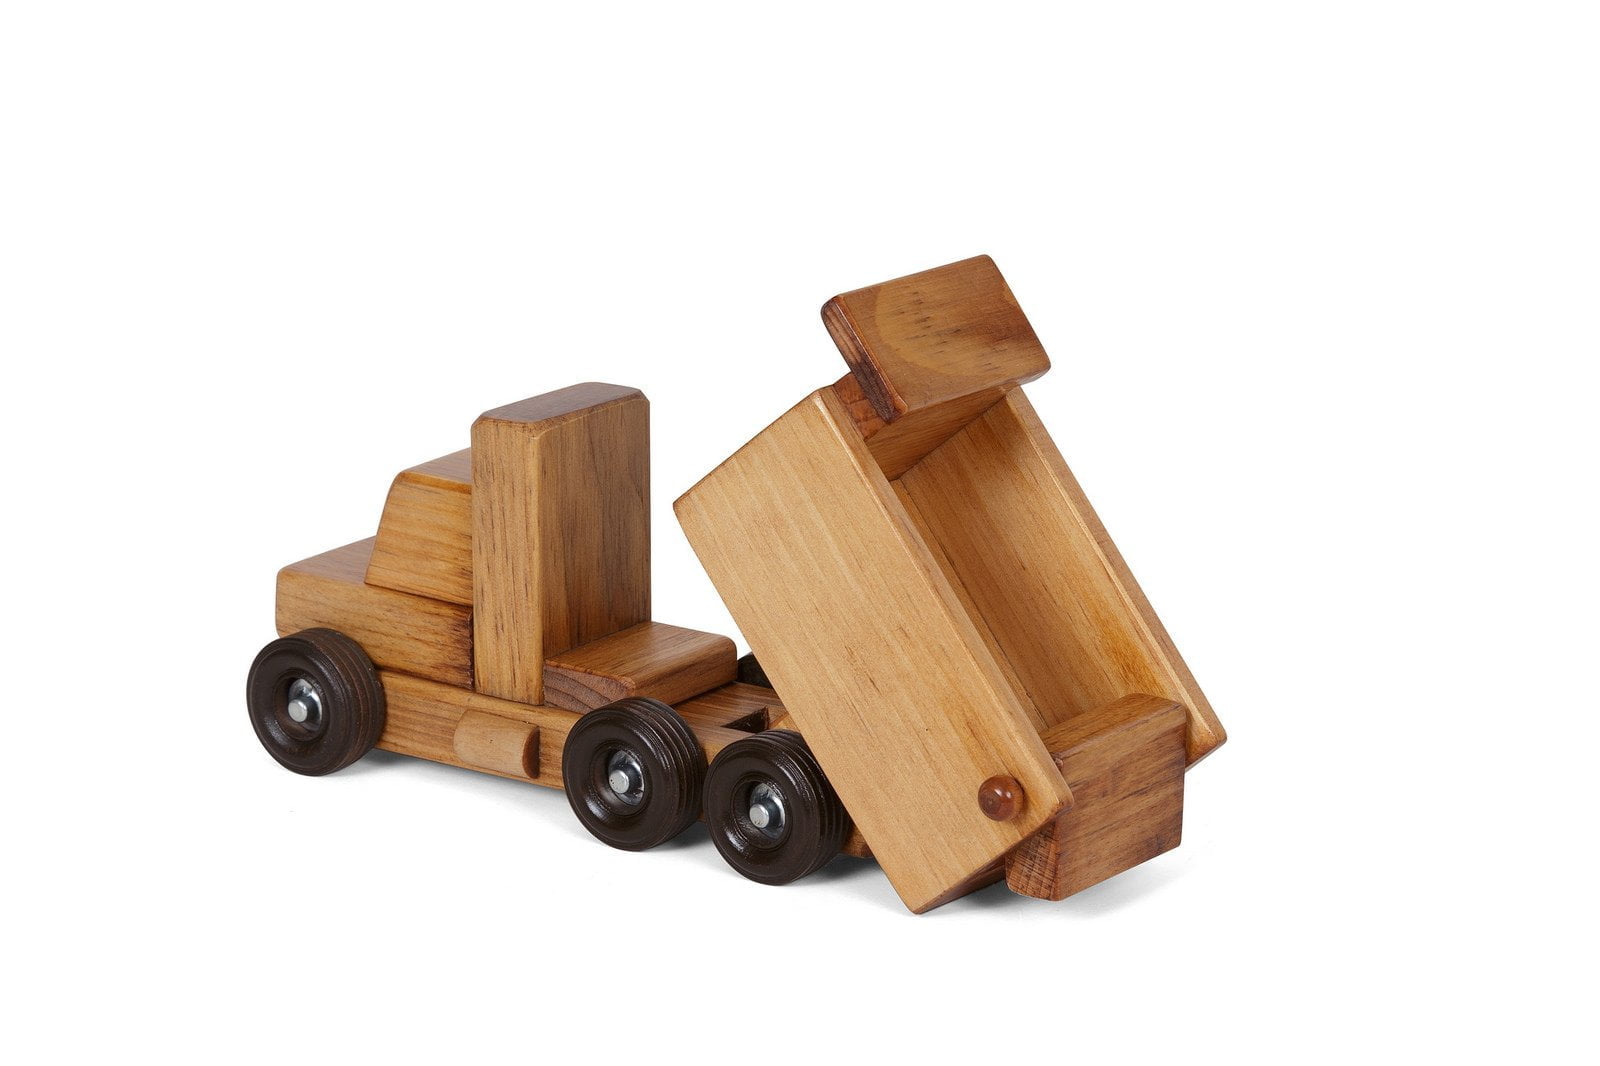 Wooden Working Dump Truck in Harvest Stain - Small